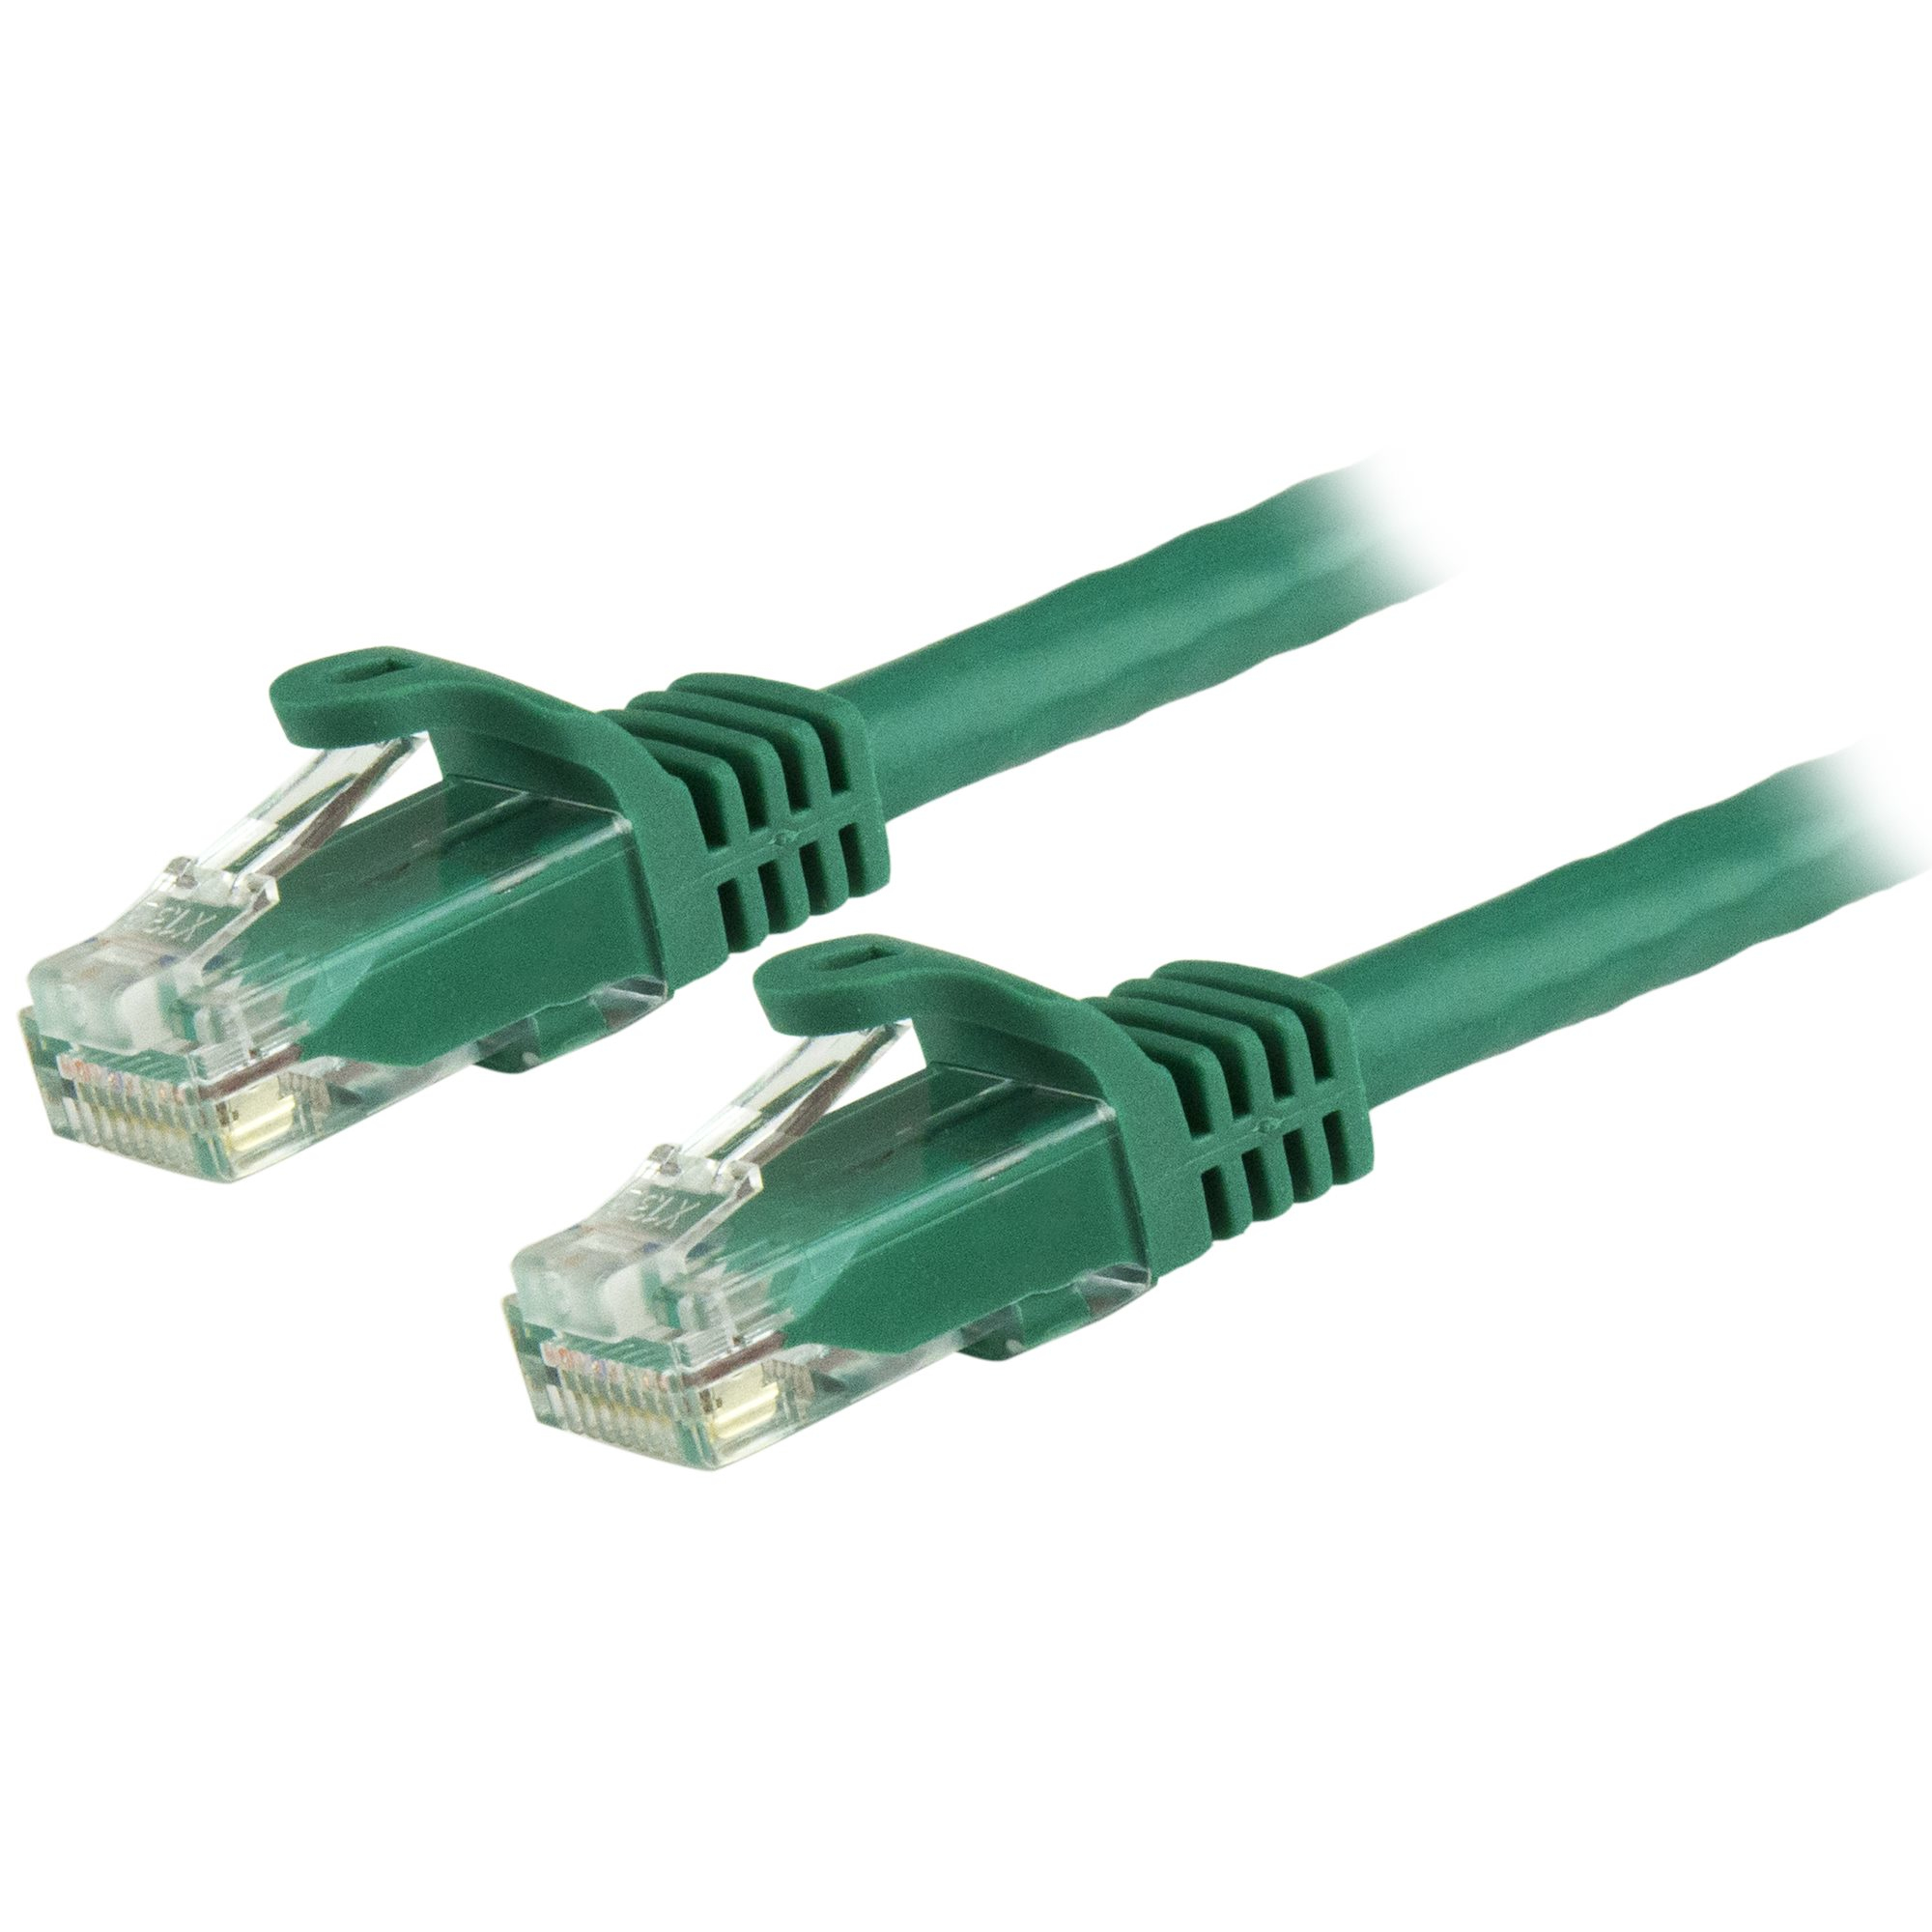 50cm CAT6 Ethernet Cable - LSZH (Low Smoke Zero Halogen) - 10 Gigabit  650MHz 100W PoE RJ45 10GbE UTP Network Patch Cord Snagless with Strain  Relief 